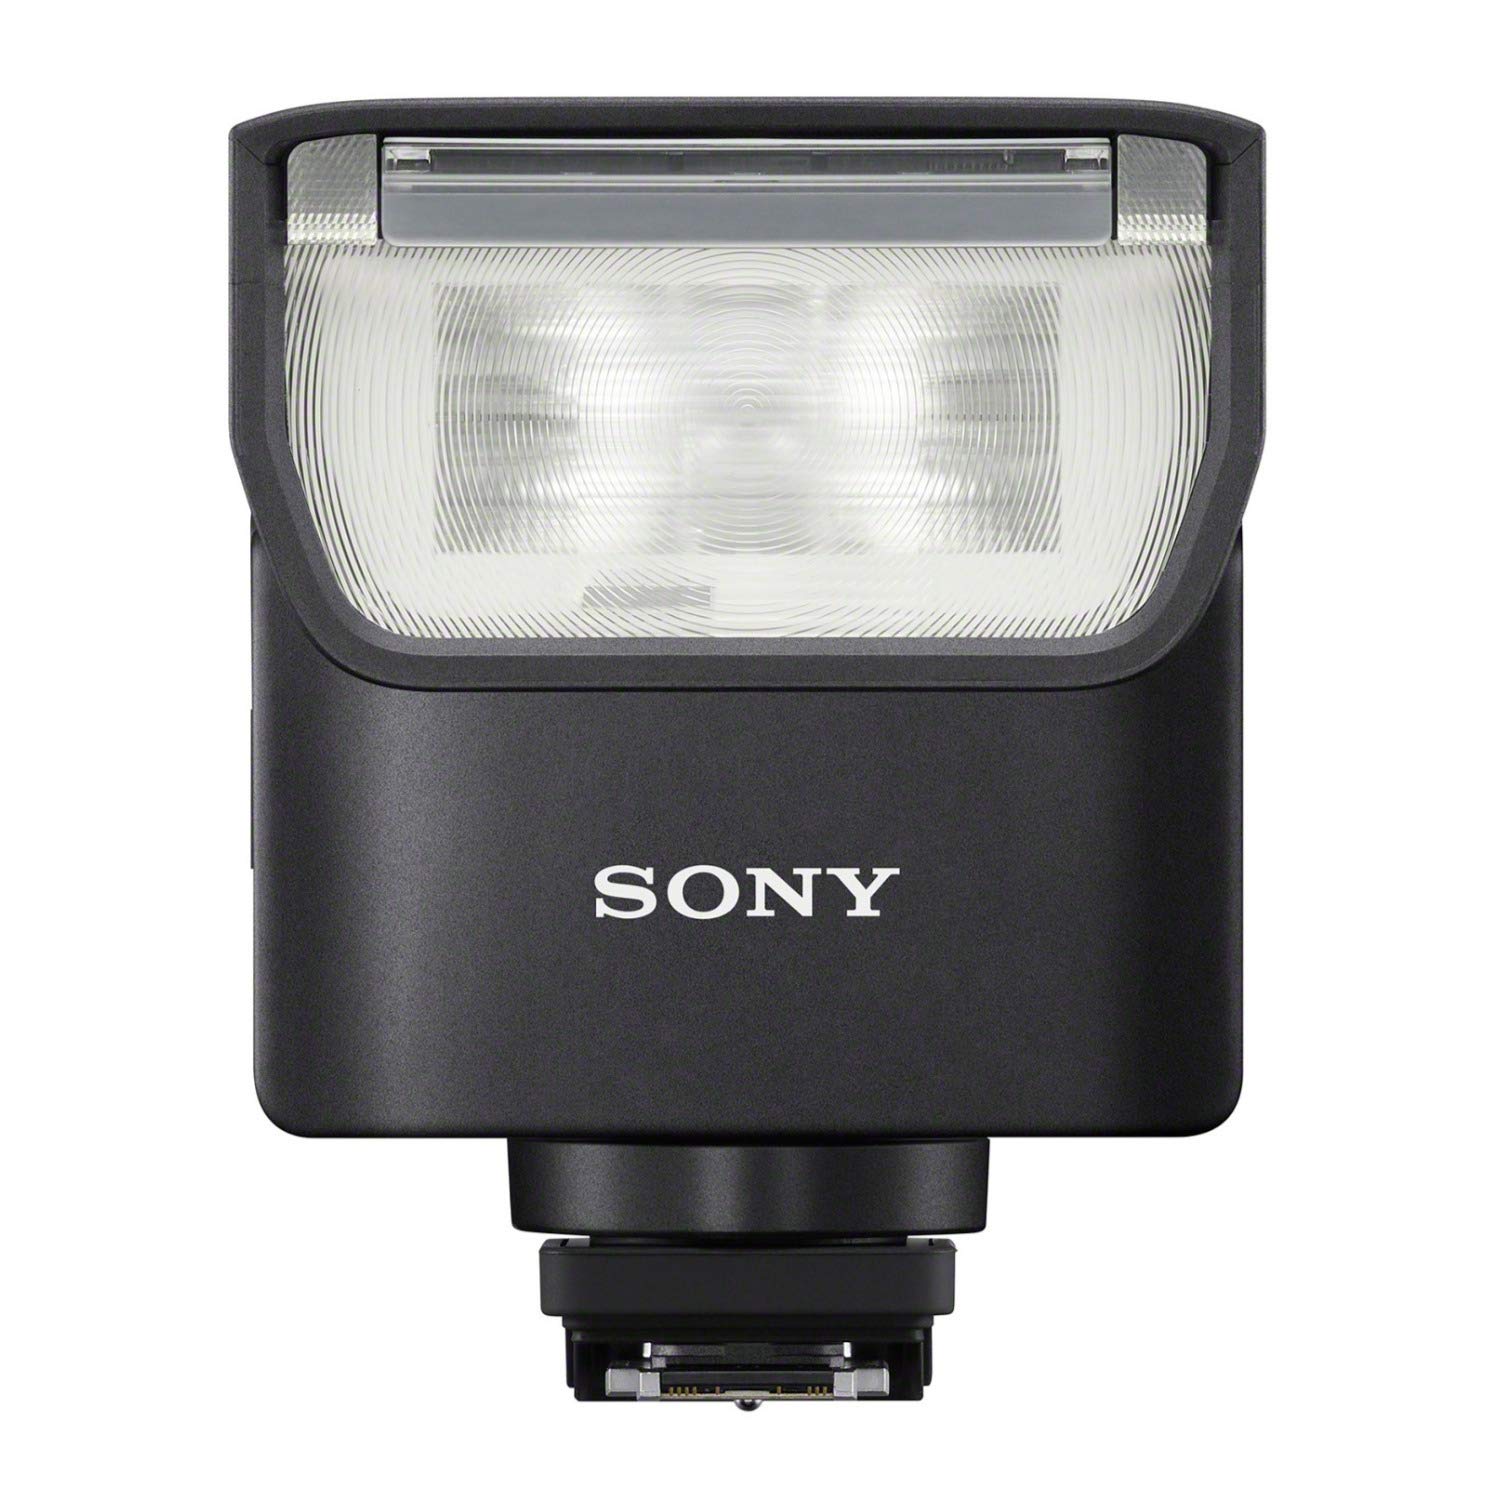 Sony External Flash with Wireless Remote Control, Black (HVL-F28RM)